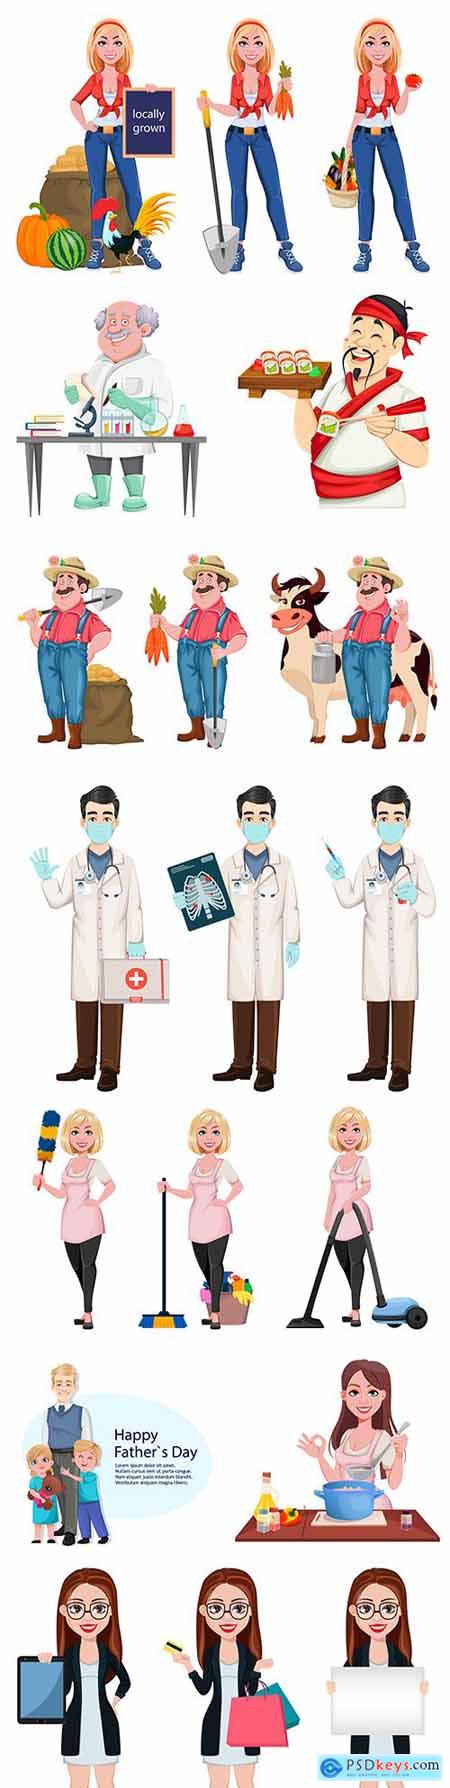 People of different professions cartoon character